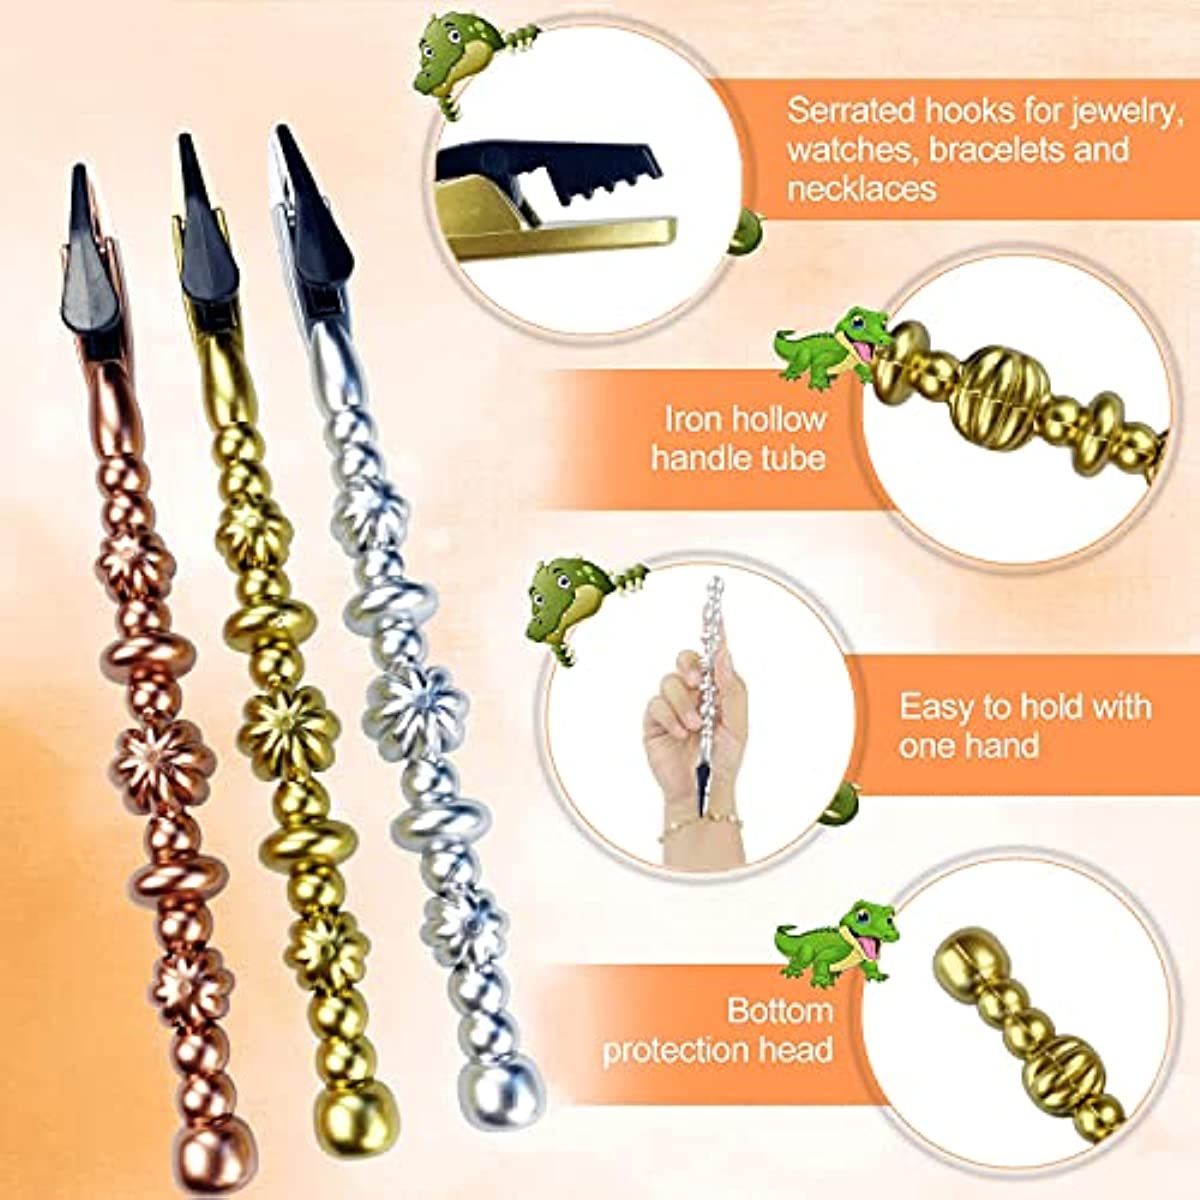 Bracelet Assist Clip Jewelry Tool Assistant Fastening and Hooking Equipment  for Head Chains, Watches and Jewelry